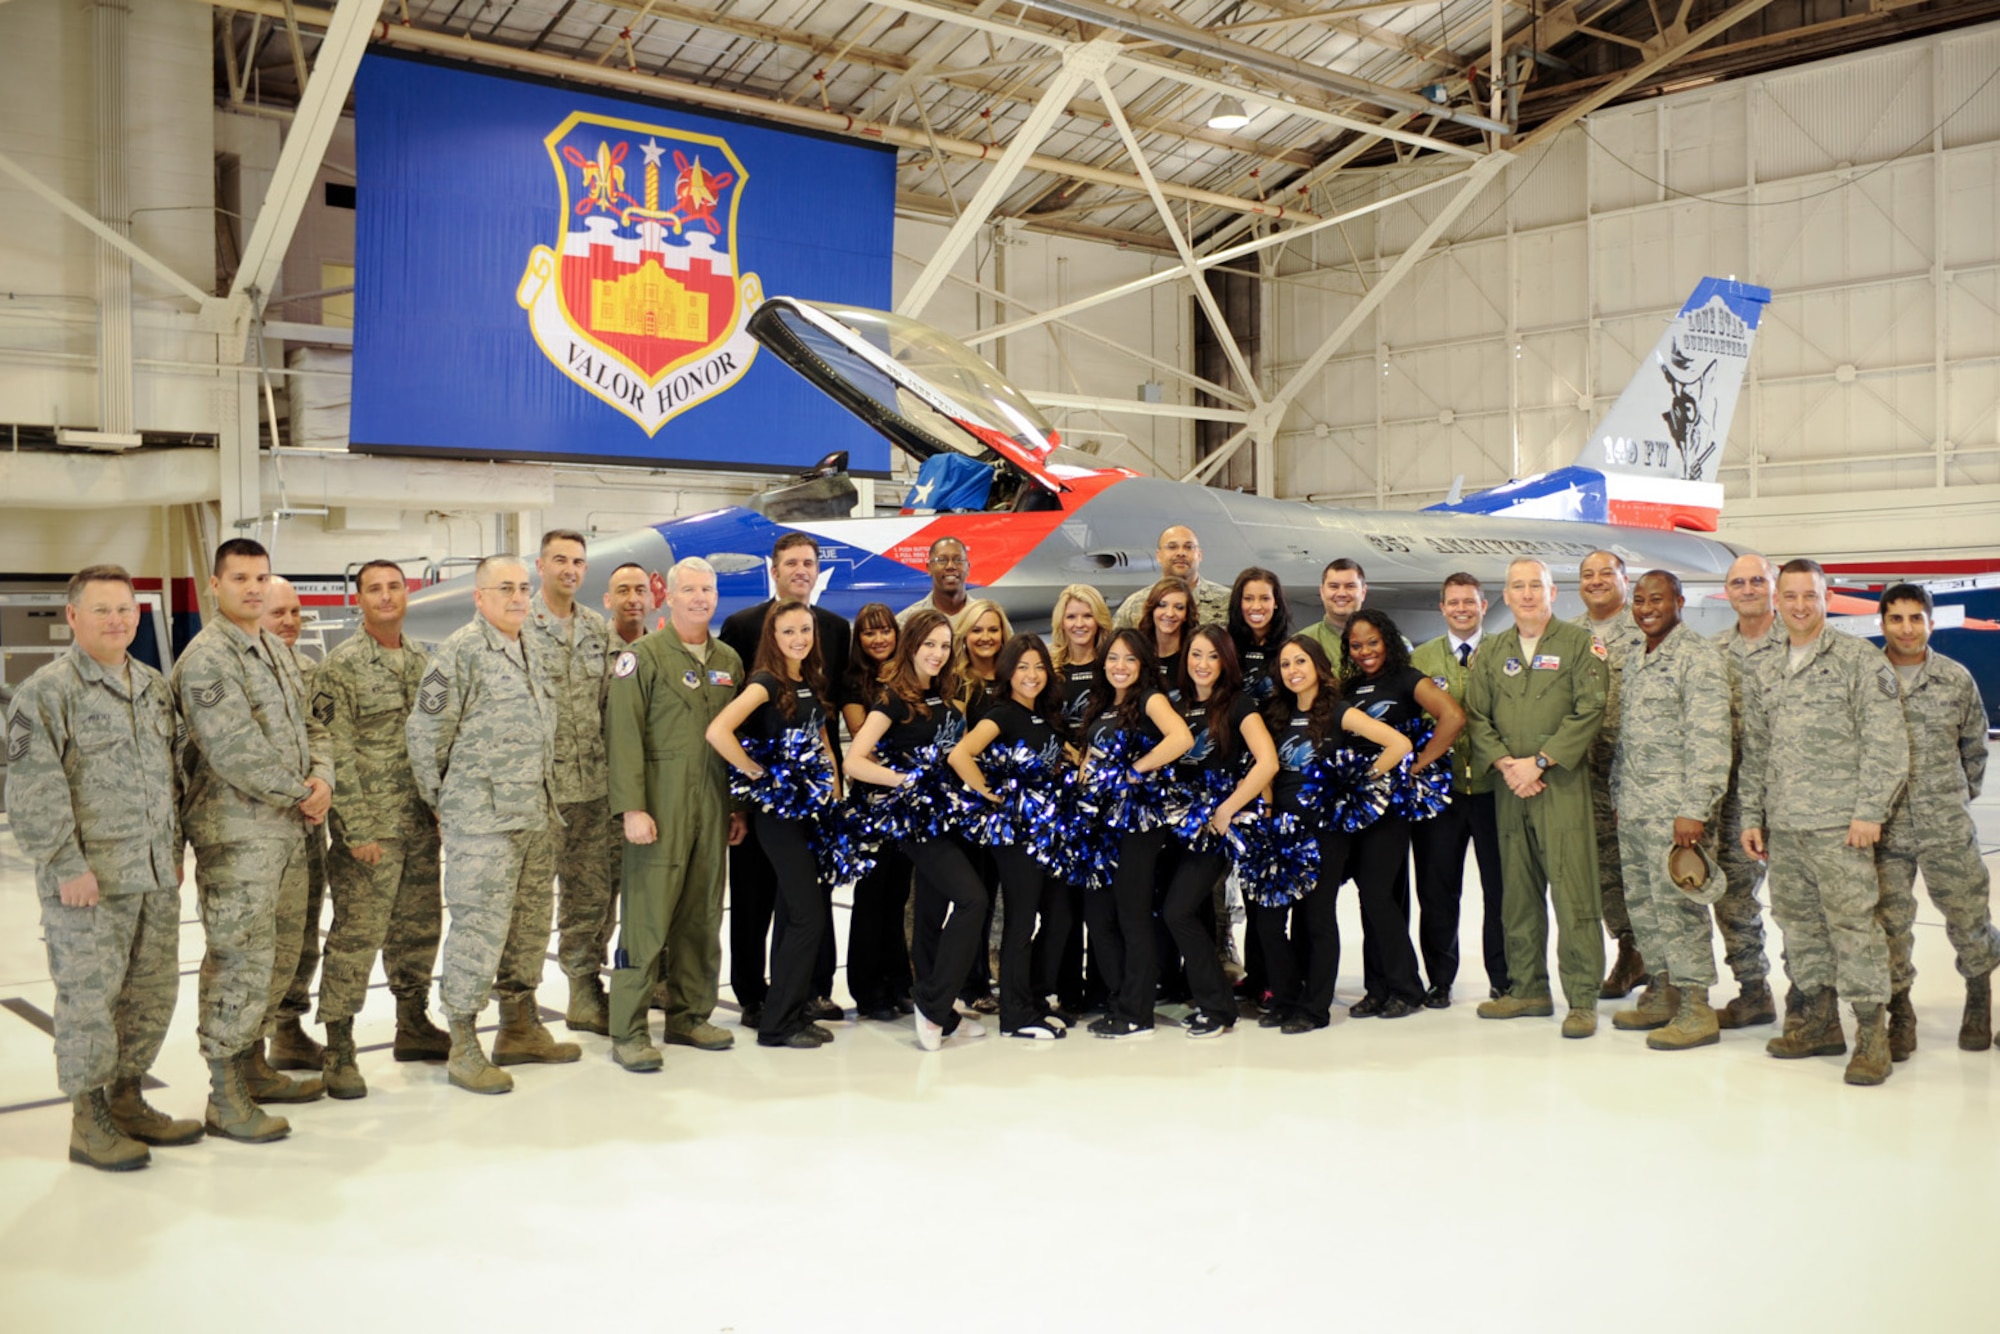 Members of the 149th Fighter Wing, known as the Lone Star Gunfighters, welcome the San Antonio Talons professional arena football team as ?Honorary Commanders? of the Texas Air National Guard unit at Lackland Air Force Base, Texas, on Feb. 11, 2012. (National Guard photo by SSgt Eric Wilson)